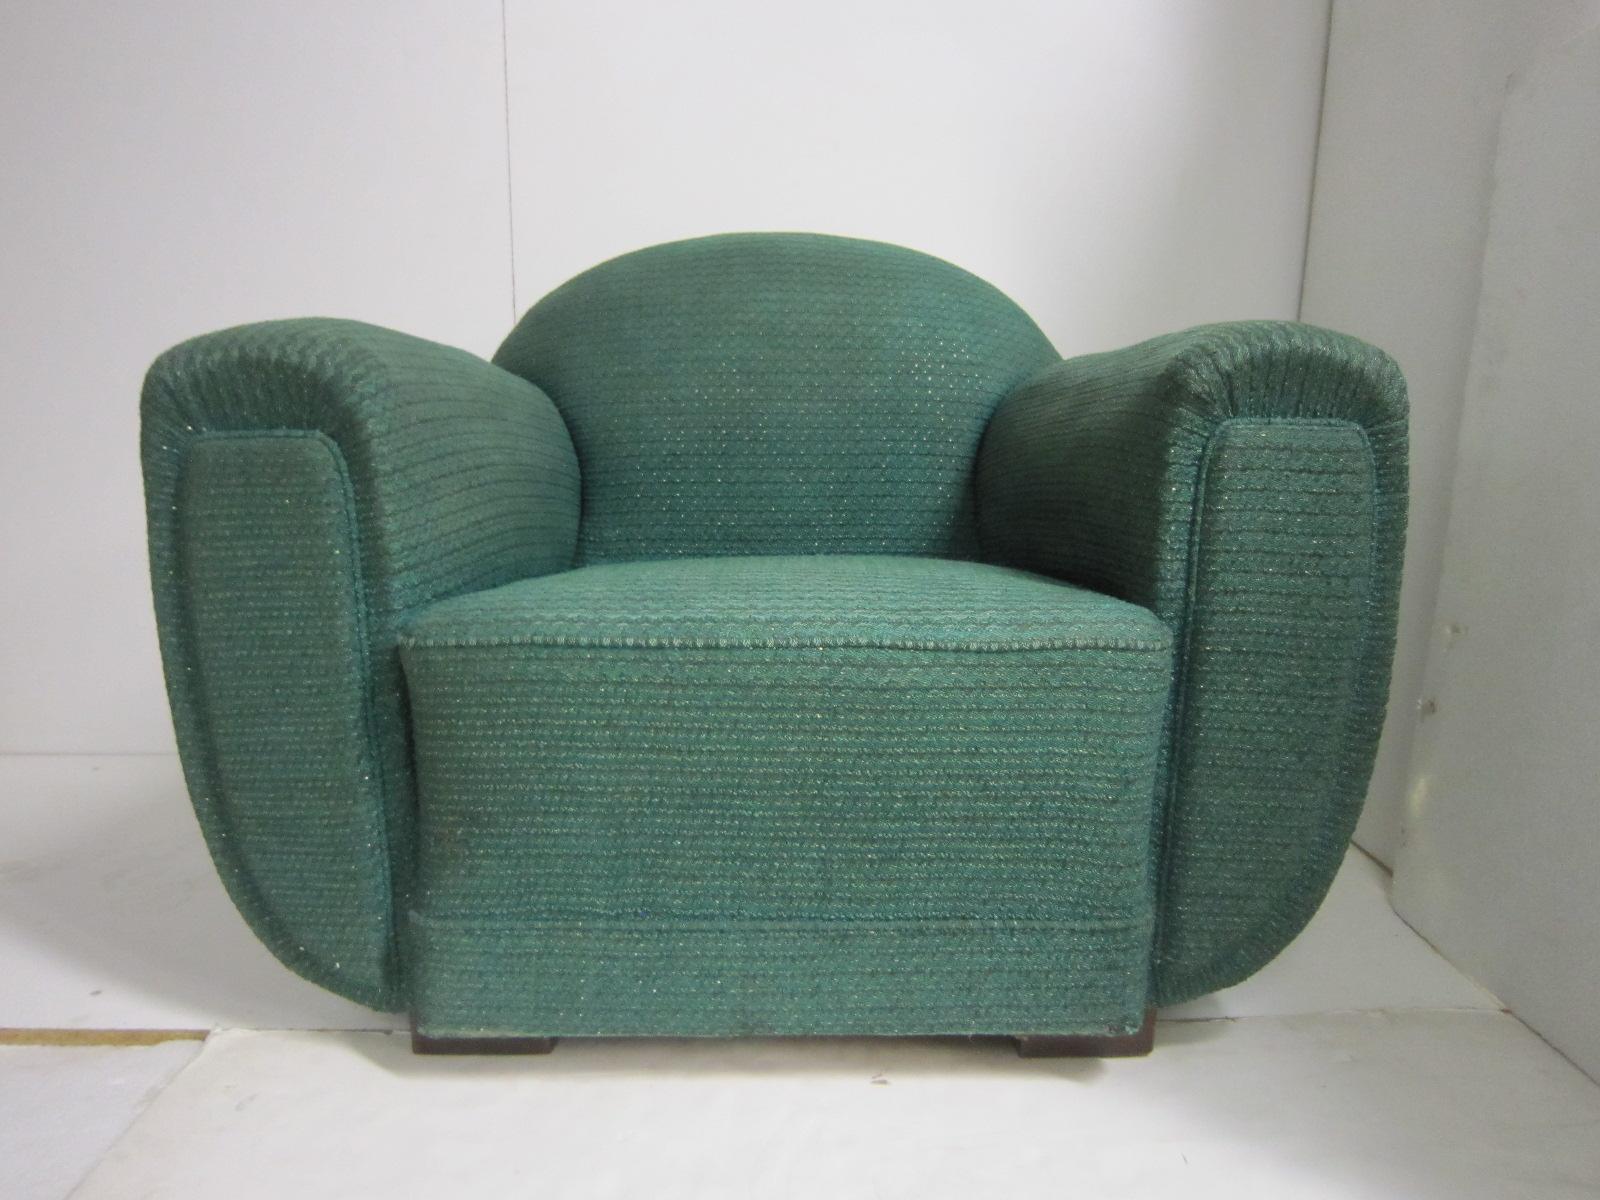 Mid-20th Century Pair of Large Original French Art Deco Upholstered Club Chairs Pierre DeLa Londe